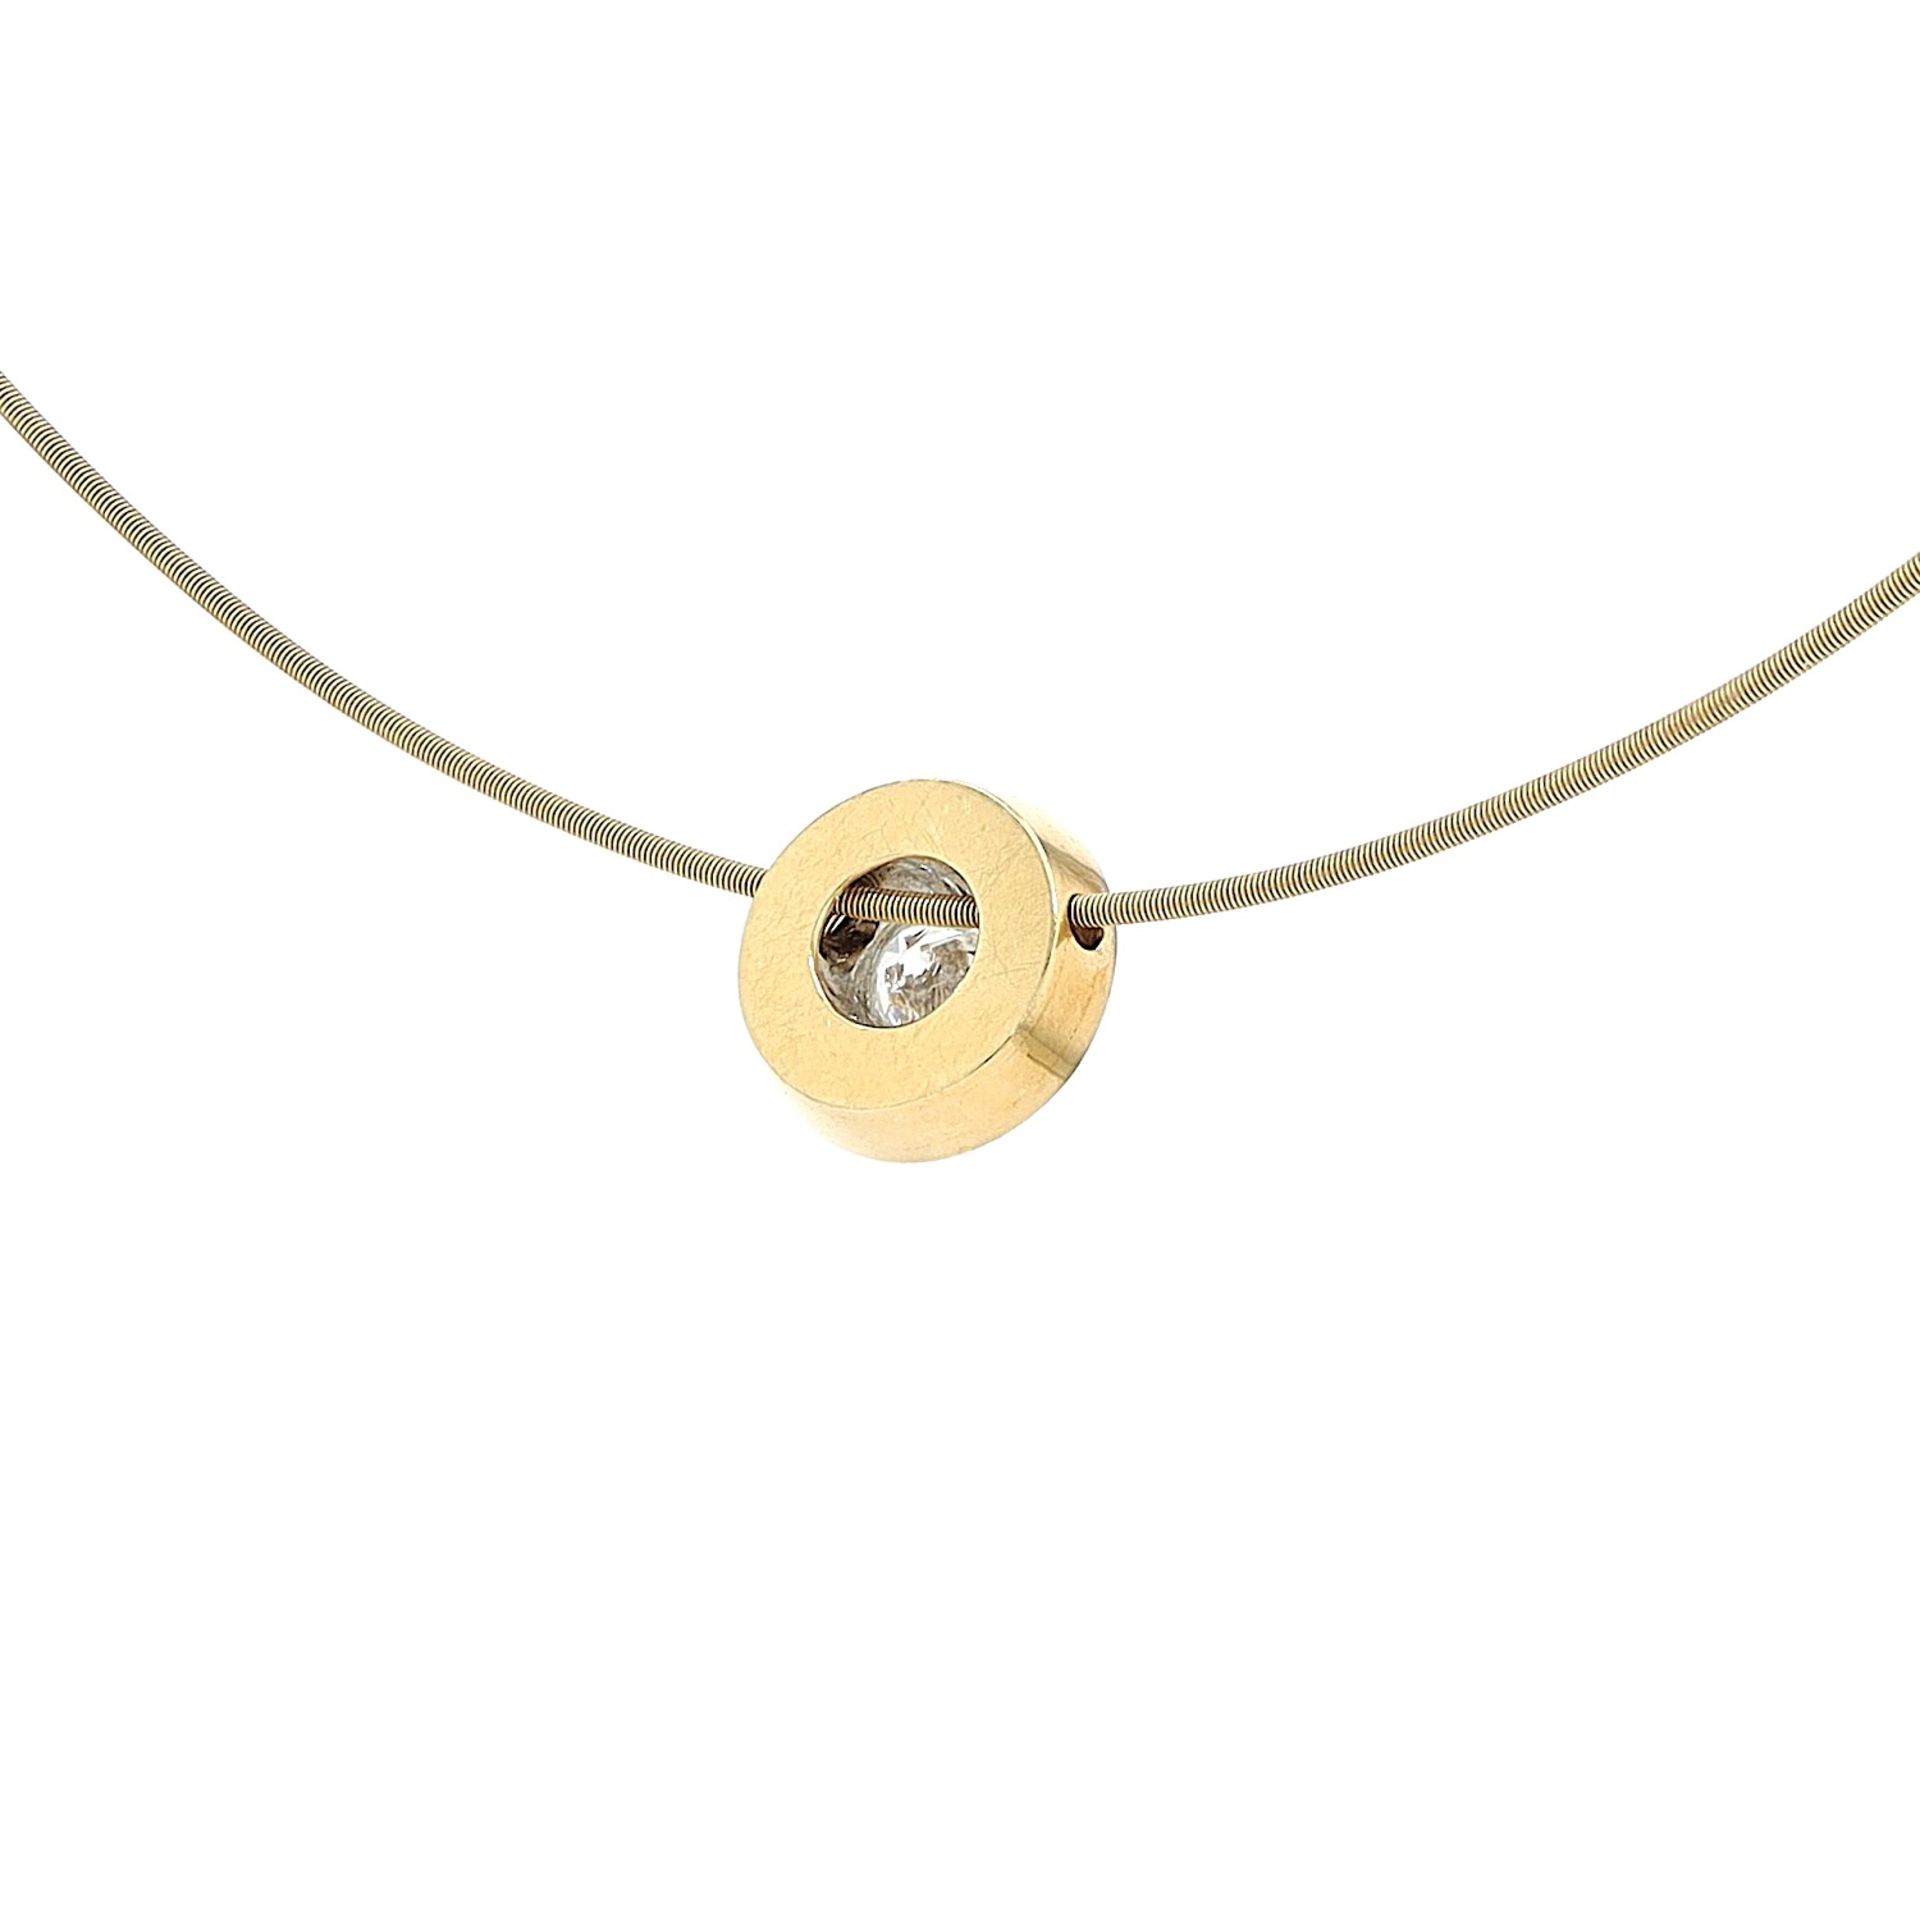 Necklace 750 gold Niessing, pendant with brilliant - Image 5 of 7